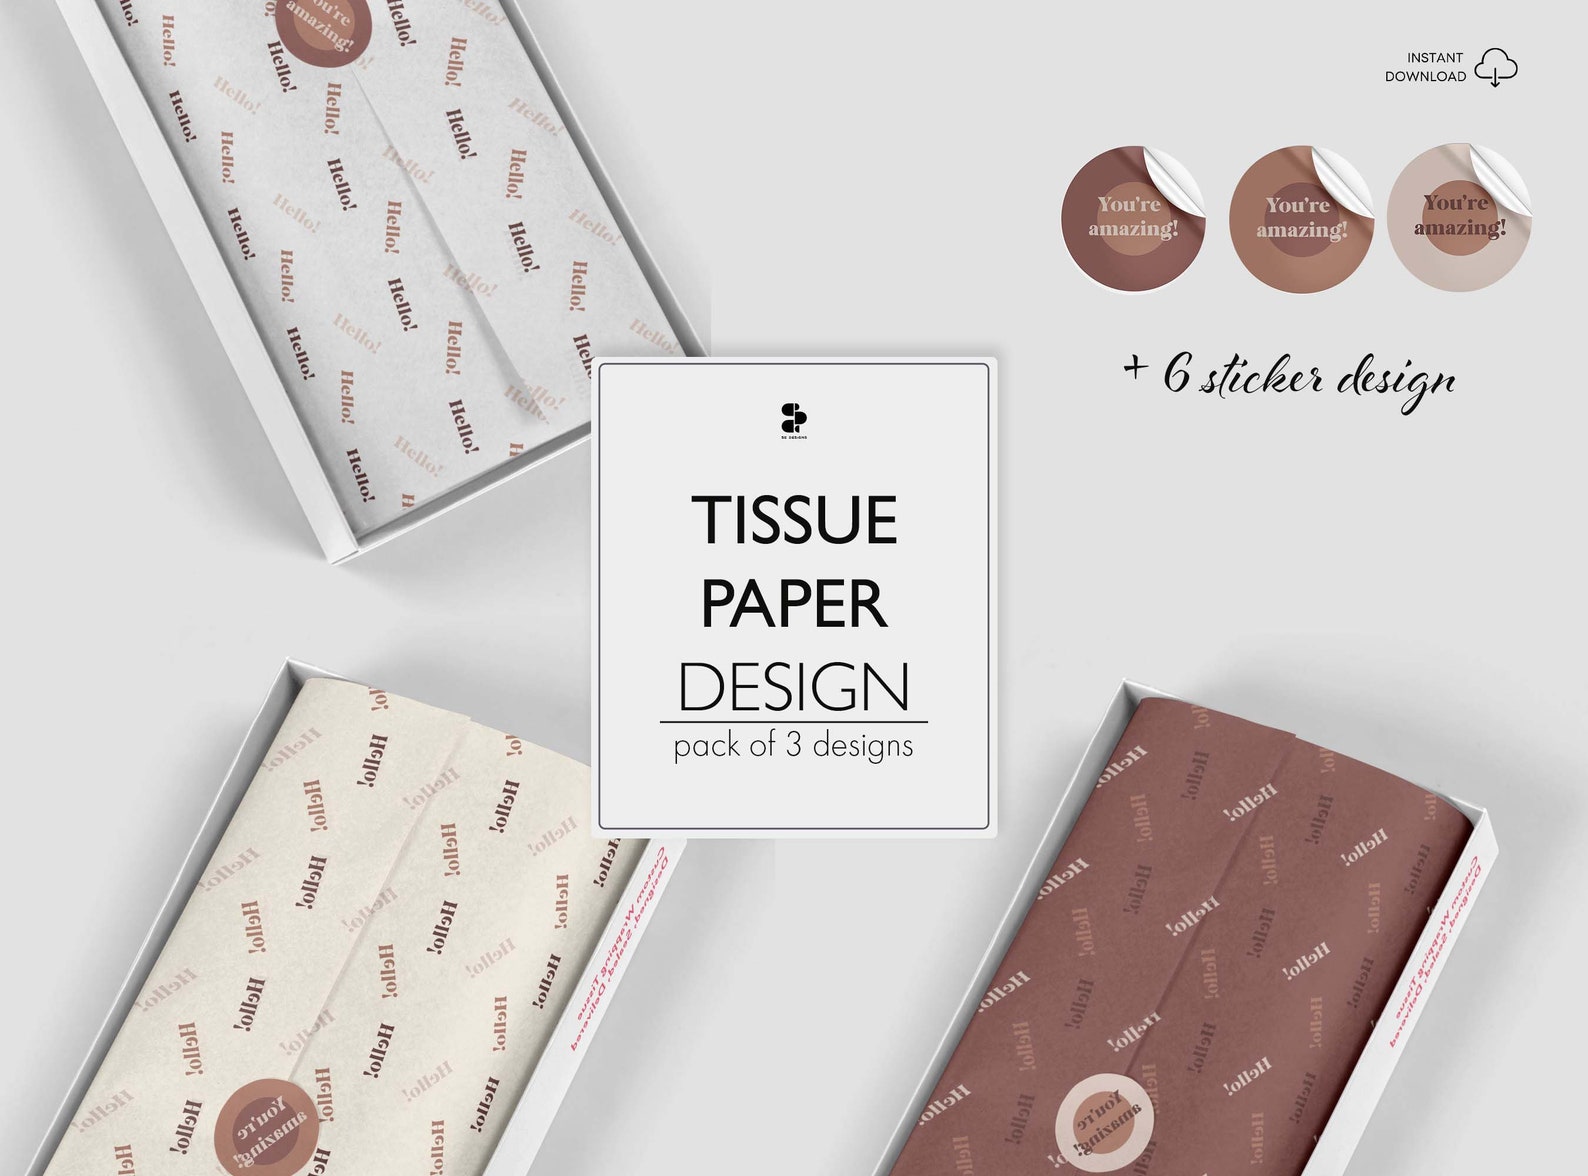 Branded Tissue Paper Digital Pattern Wrapping Paper Design - Etsy